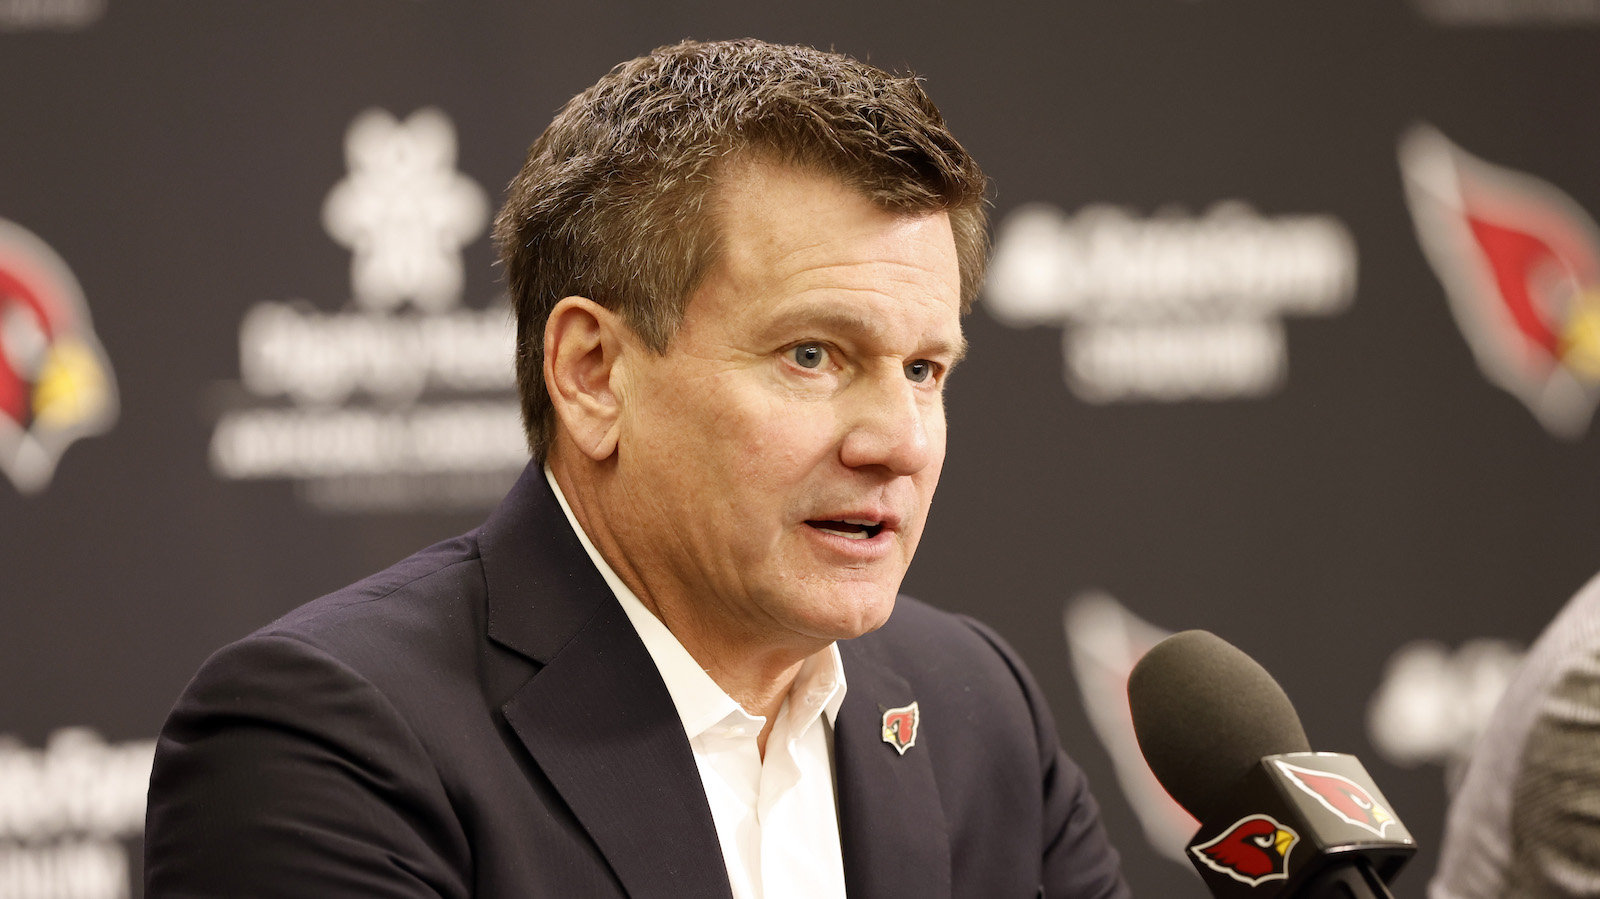 TEMPE, ARIZONA - FEBRUARY 16: Owner Michael Bidwill of the Arizona Cardinals answers a question from the media during a press conference introducing new head coach Jonathan Gannon at Dignity Health Arizona Cardinals Training Center on February 16, 2023 in Tempe, Arizona.